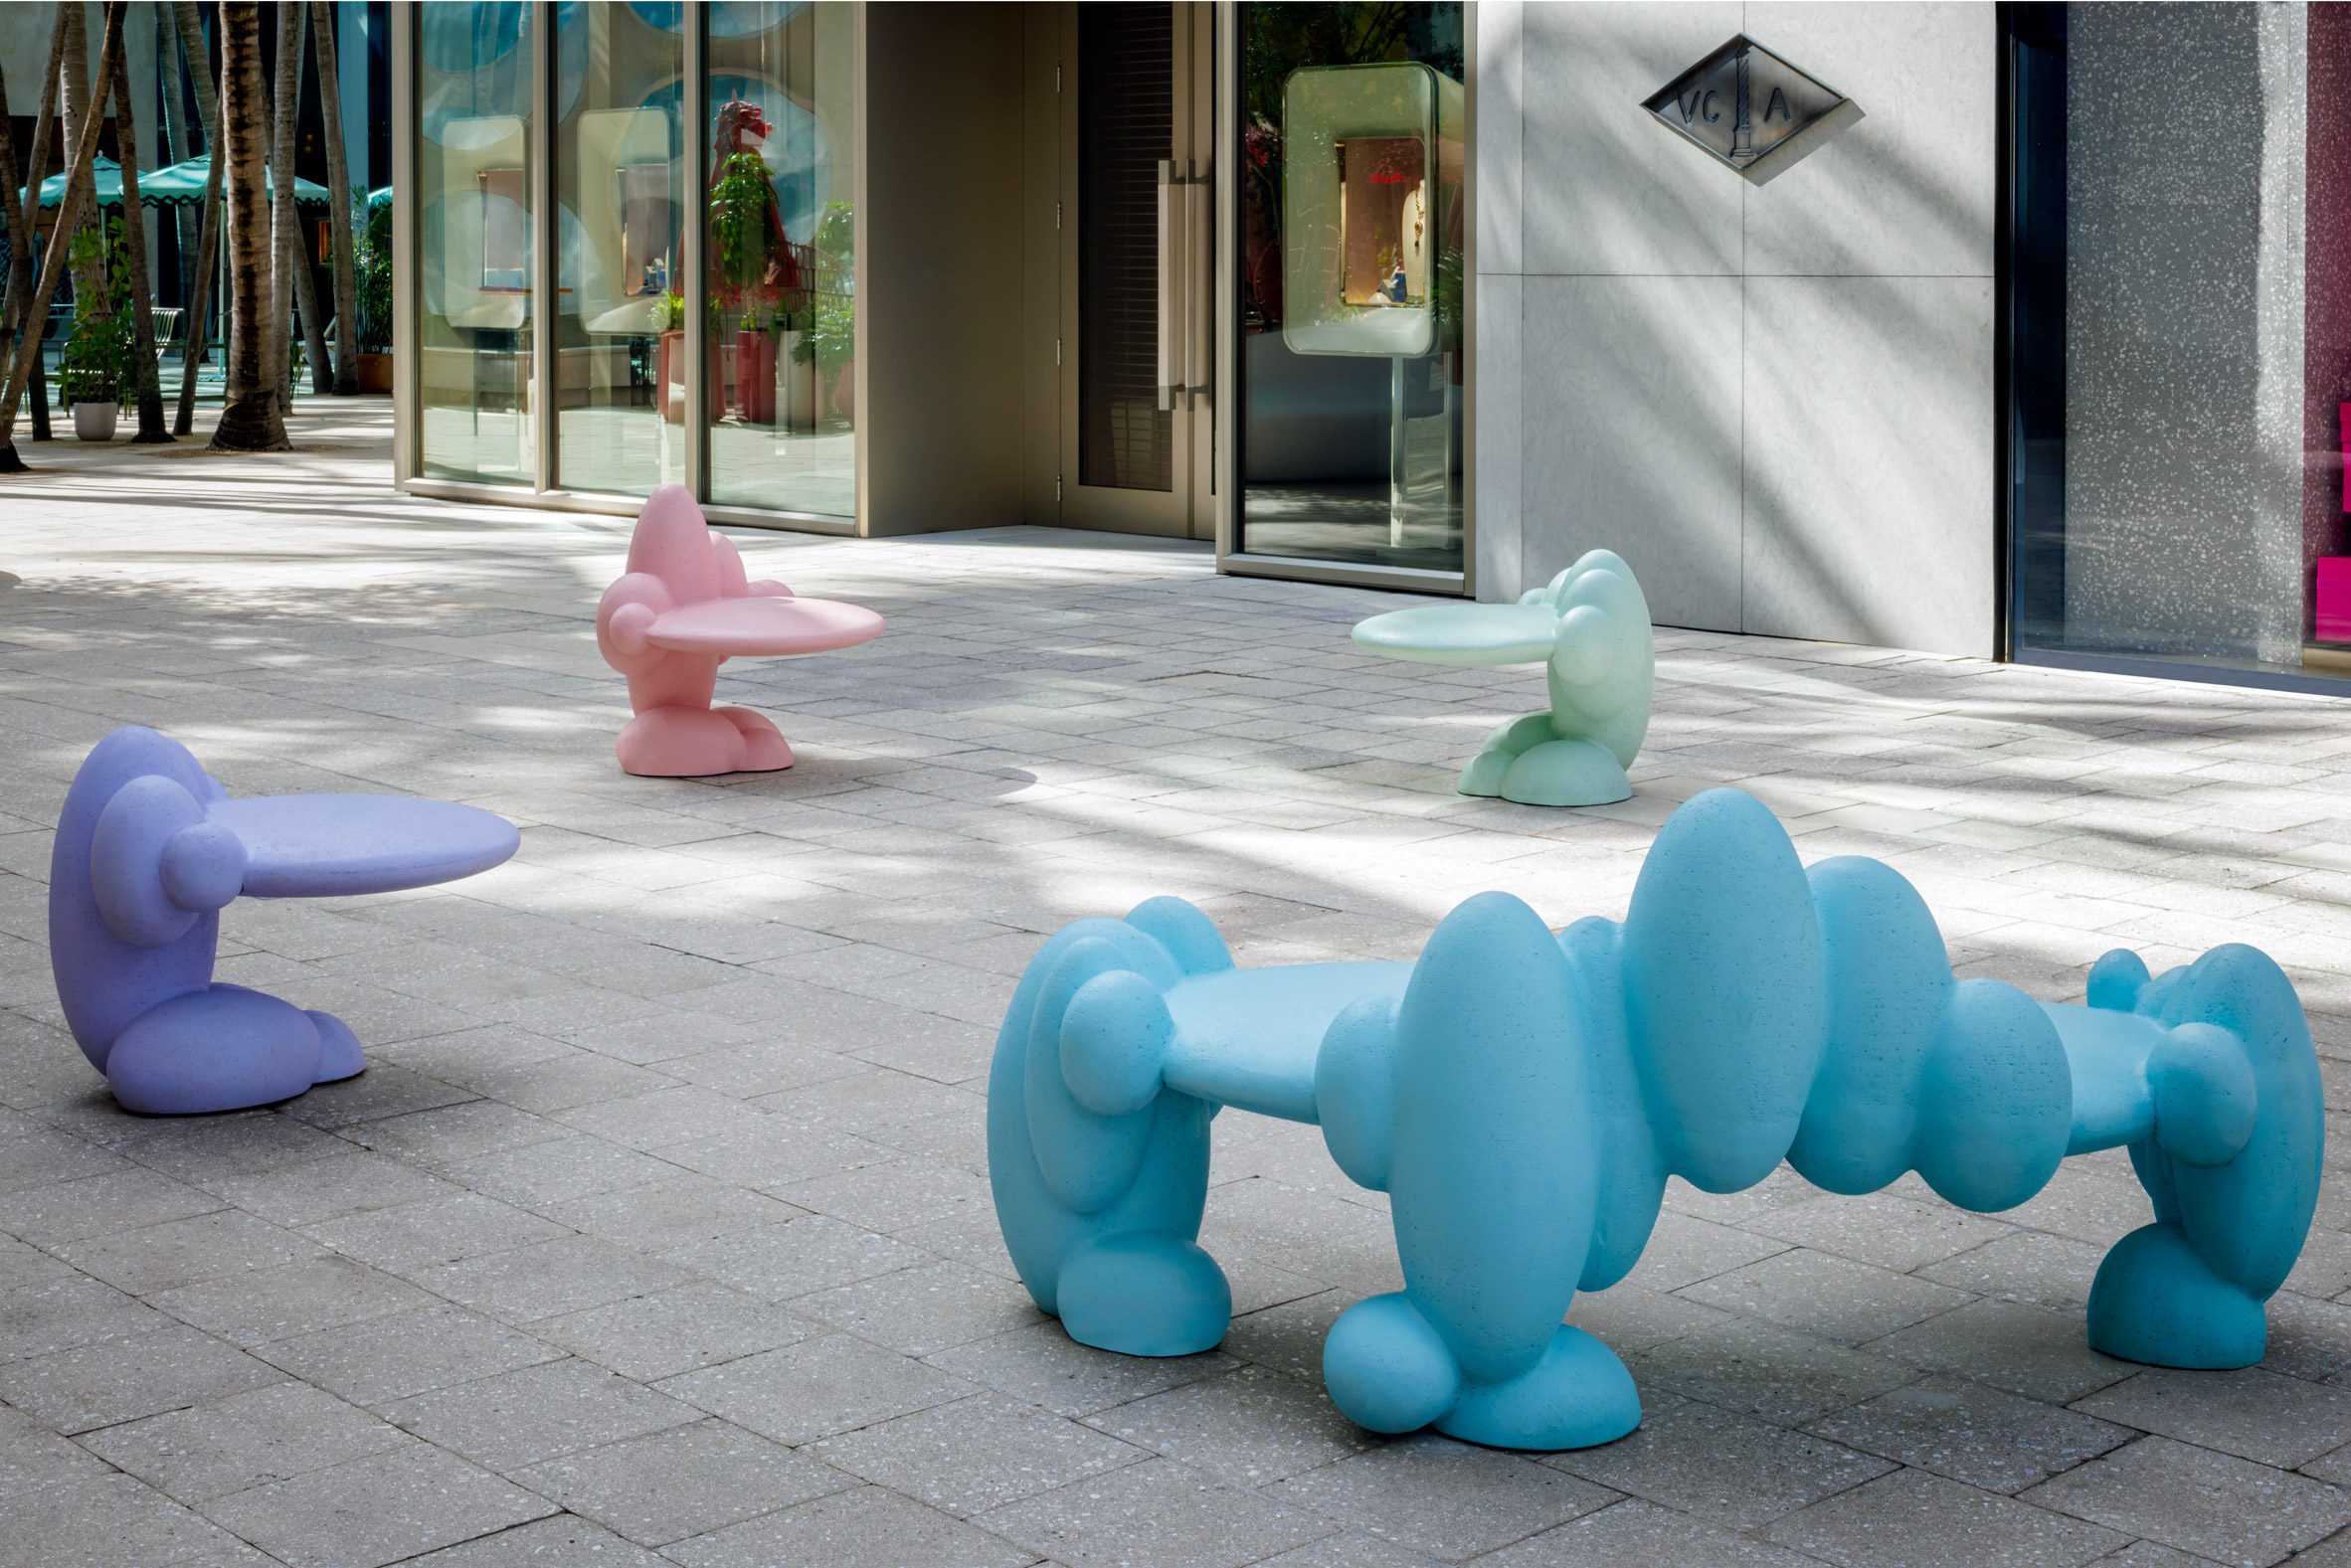 Colourful benches and table in public by Lara Bohinc